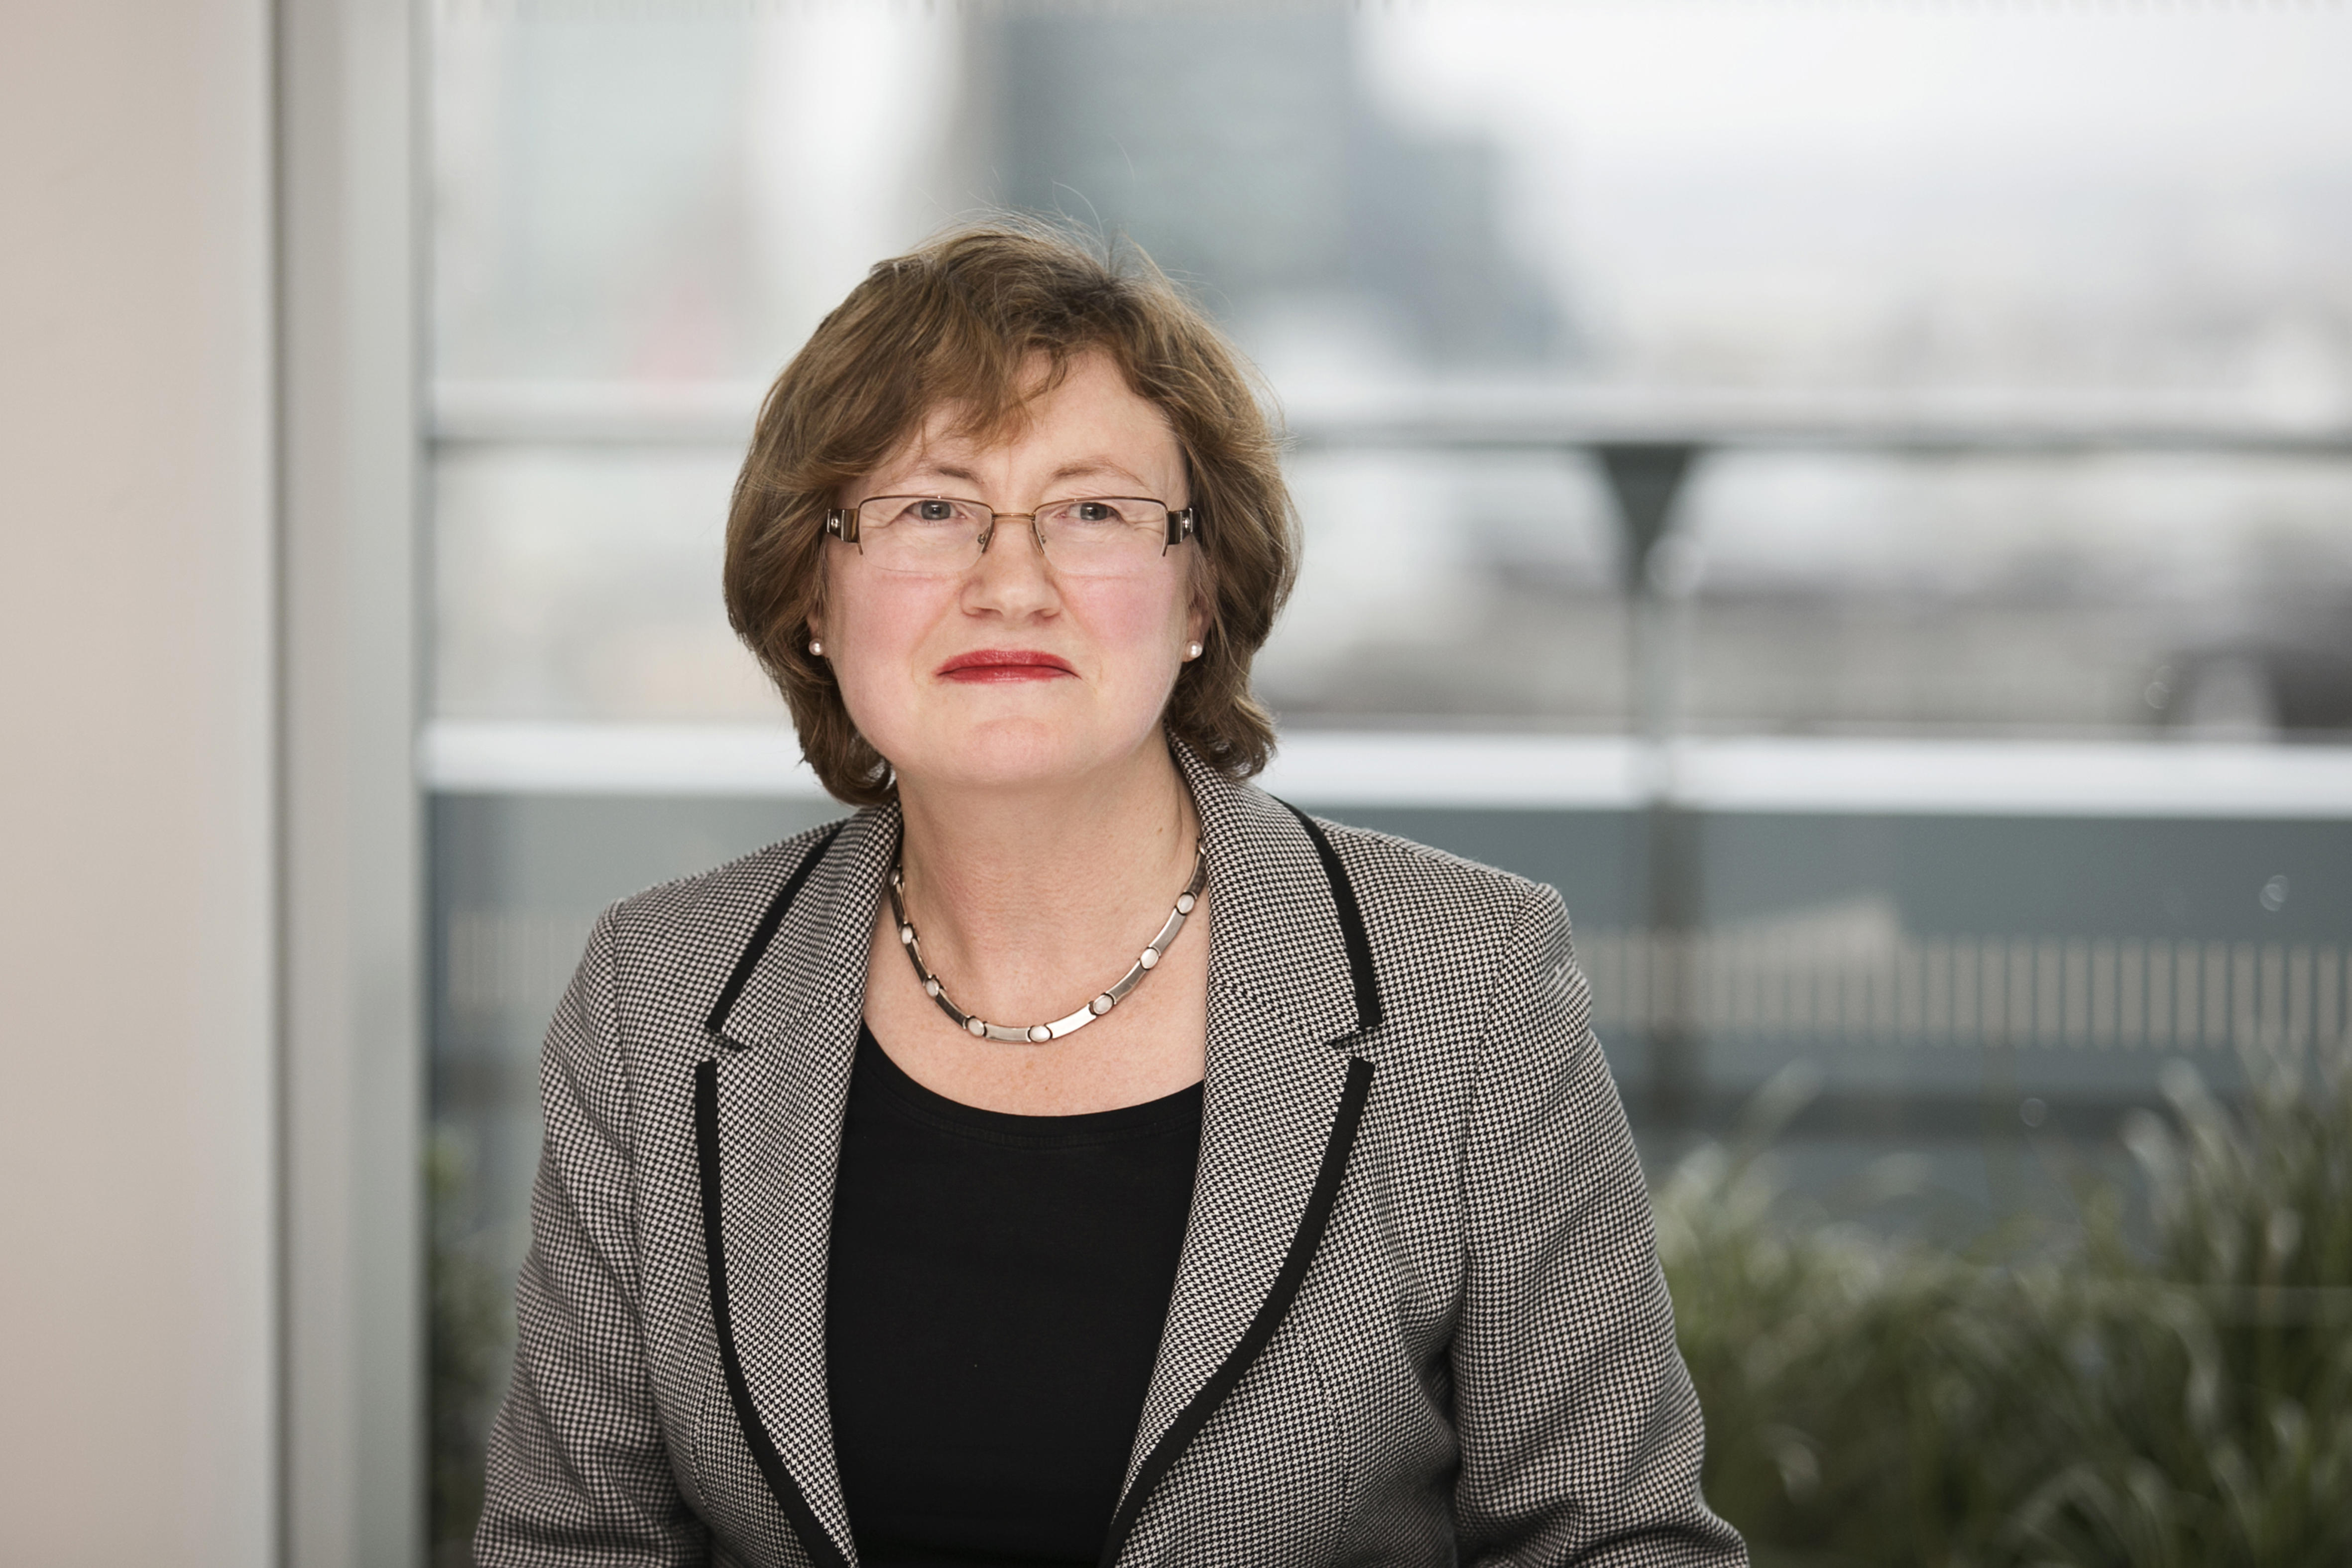 Clare Hatcher, energy partner at global law firm Clyde & Co